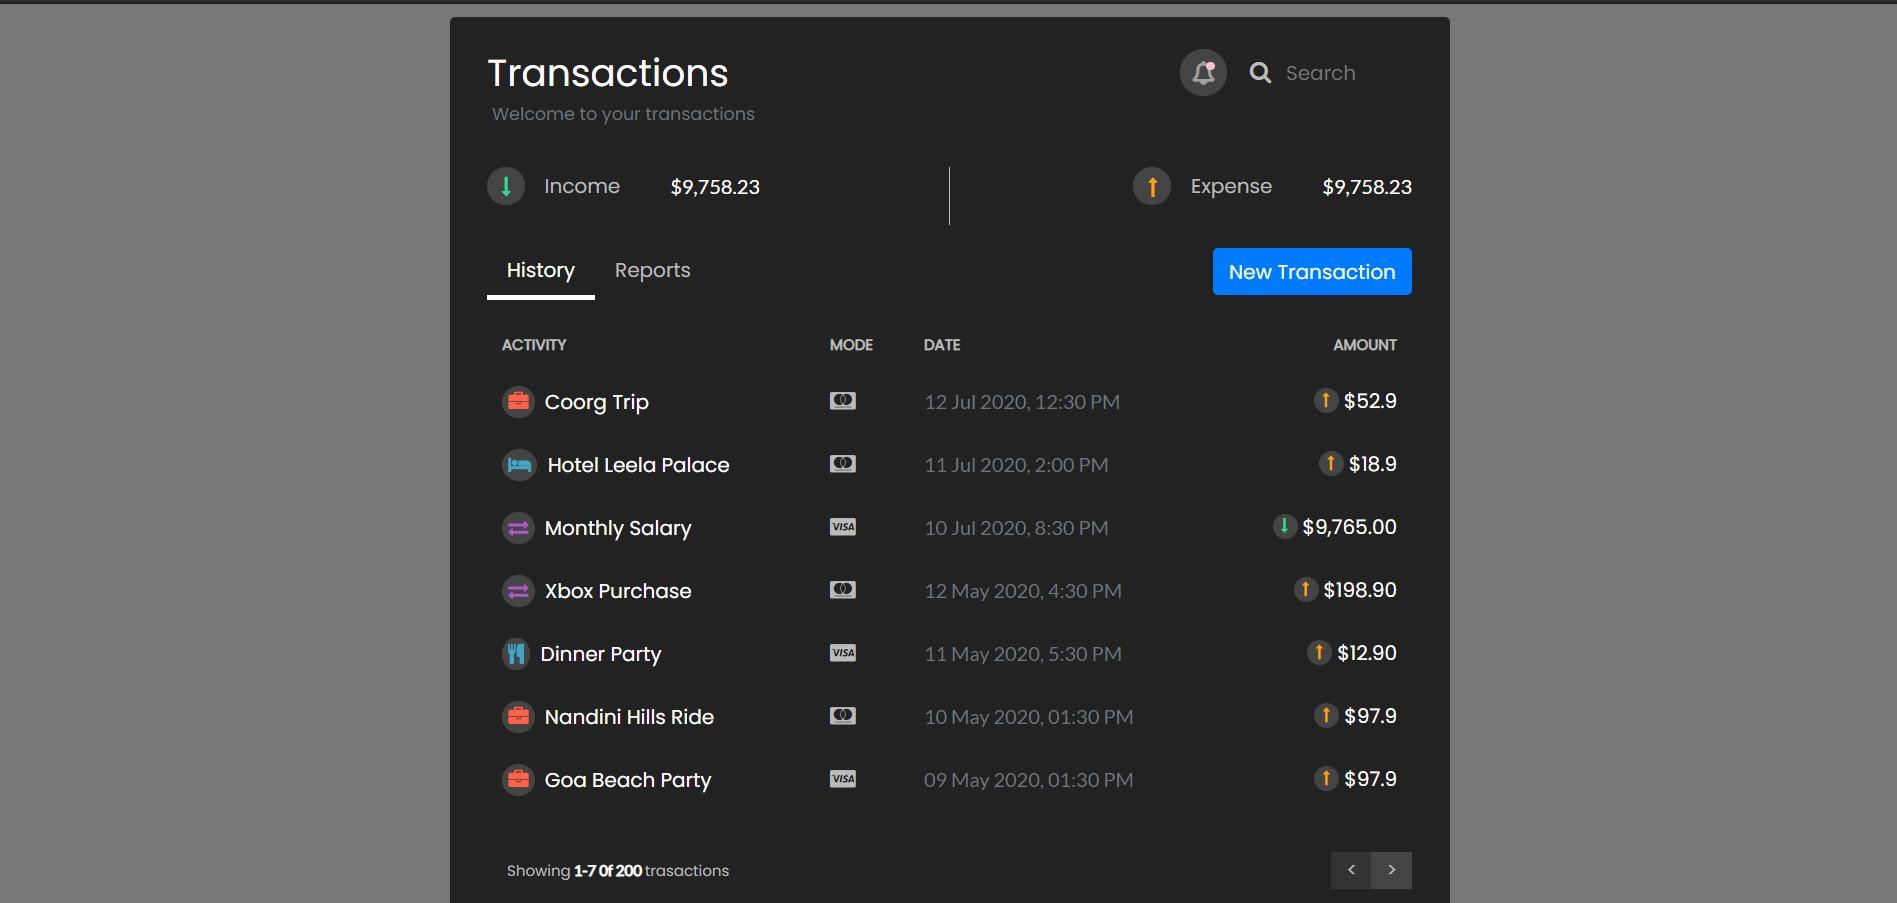 Transaction history details table with user activity